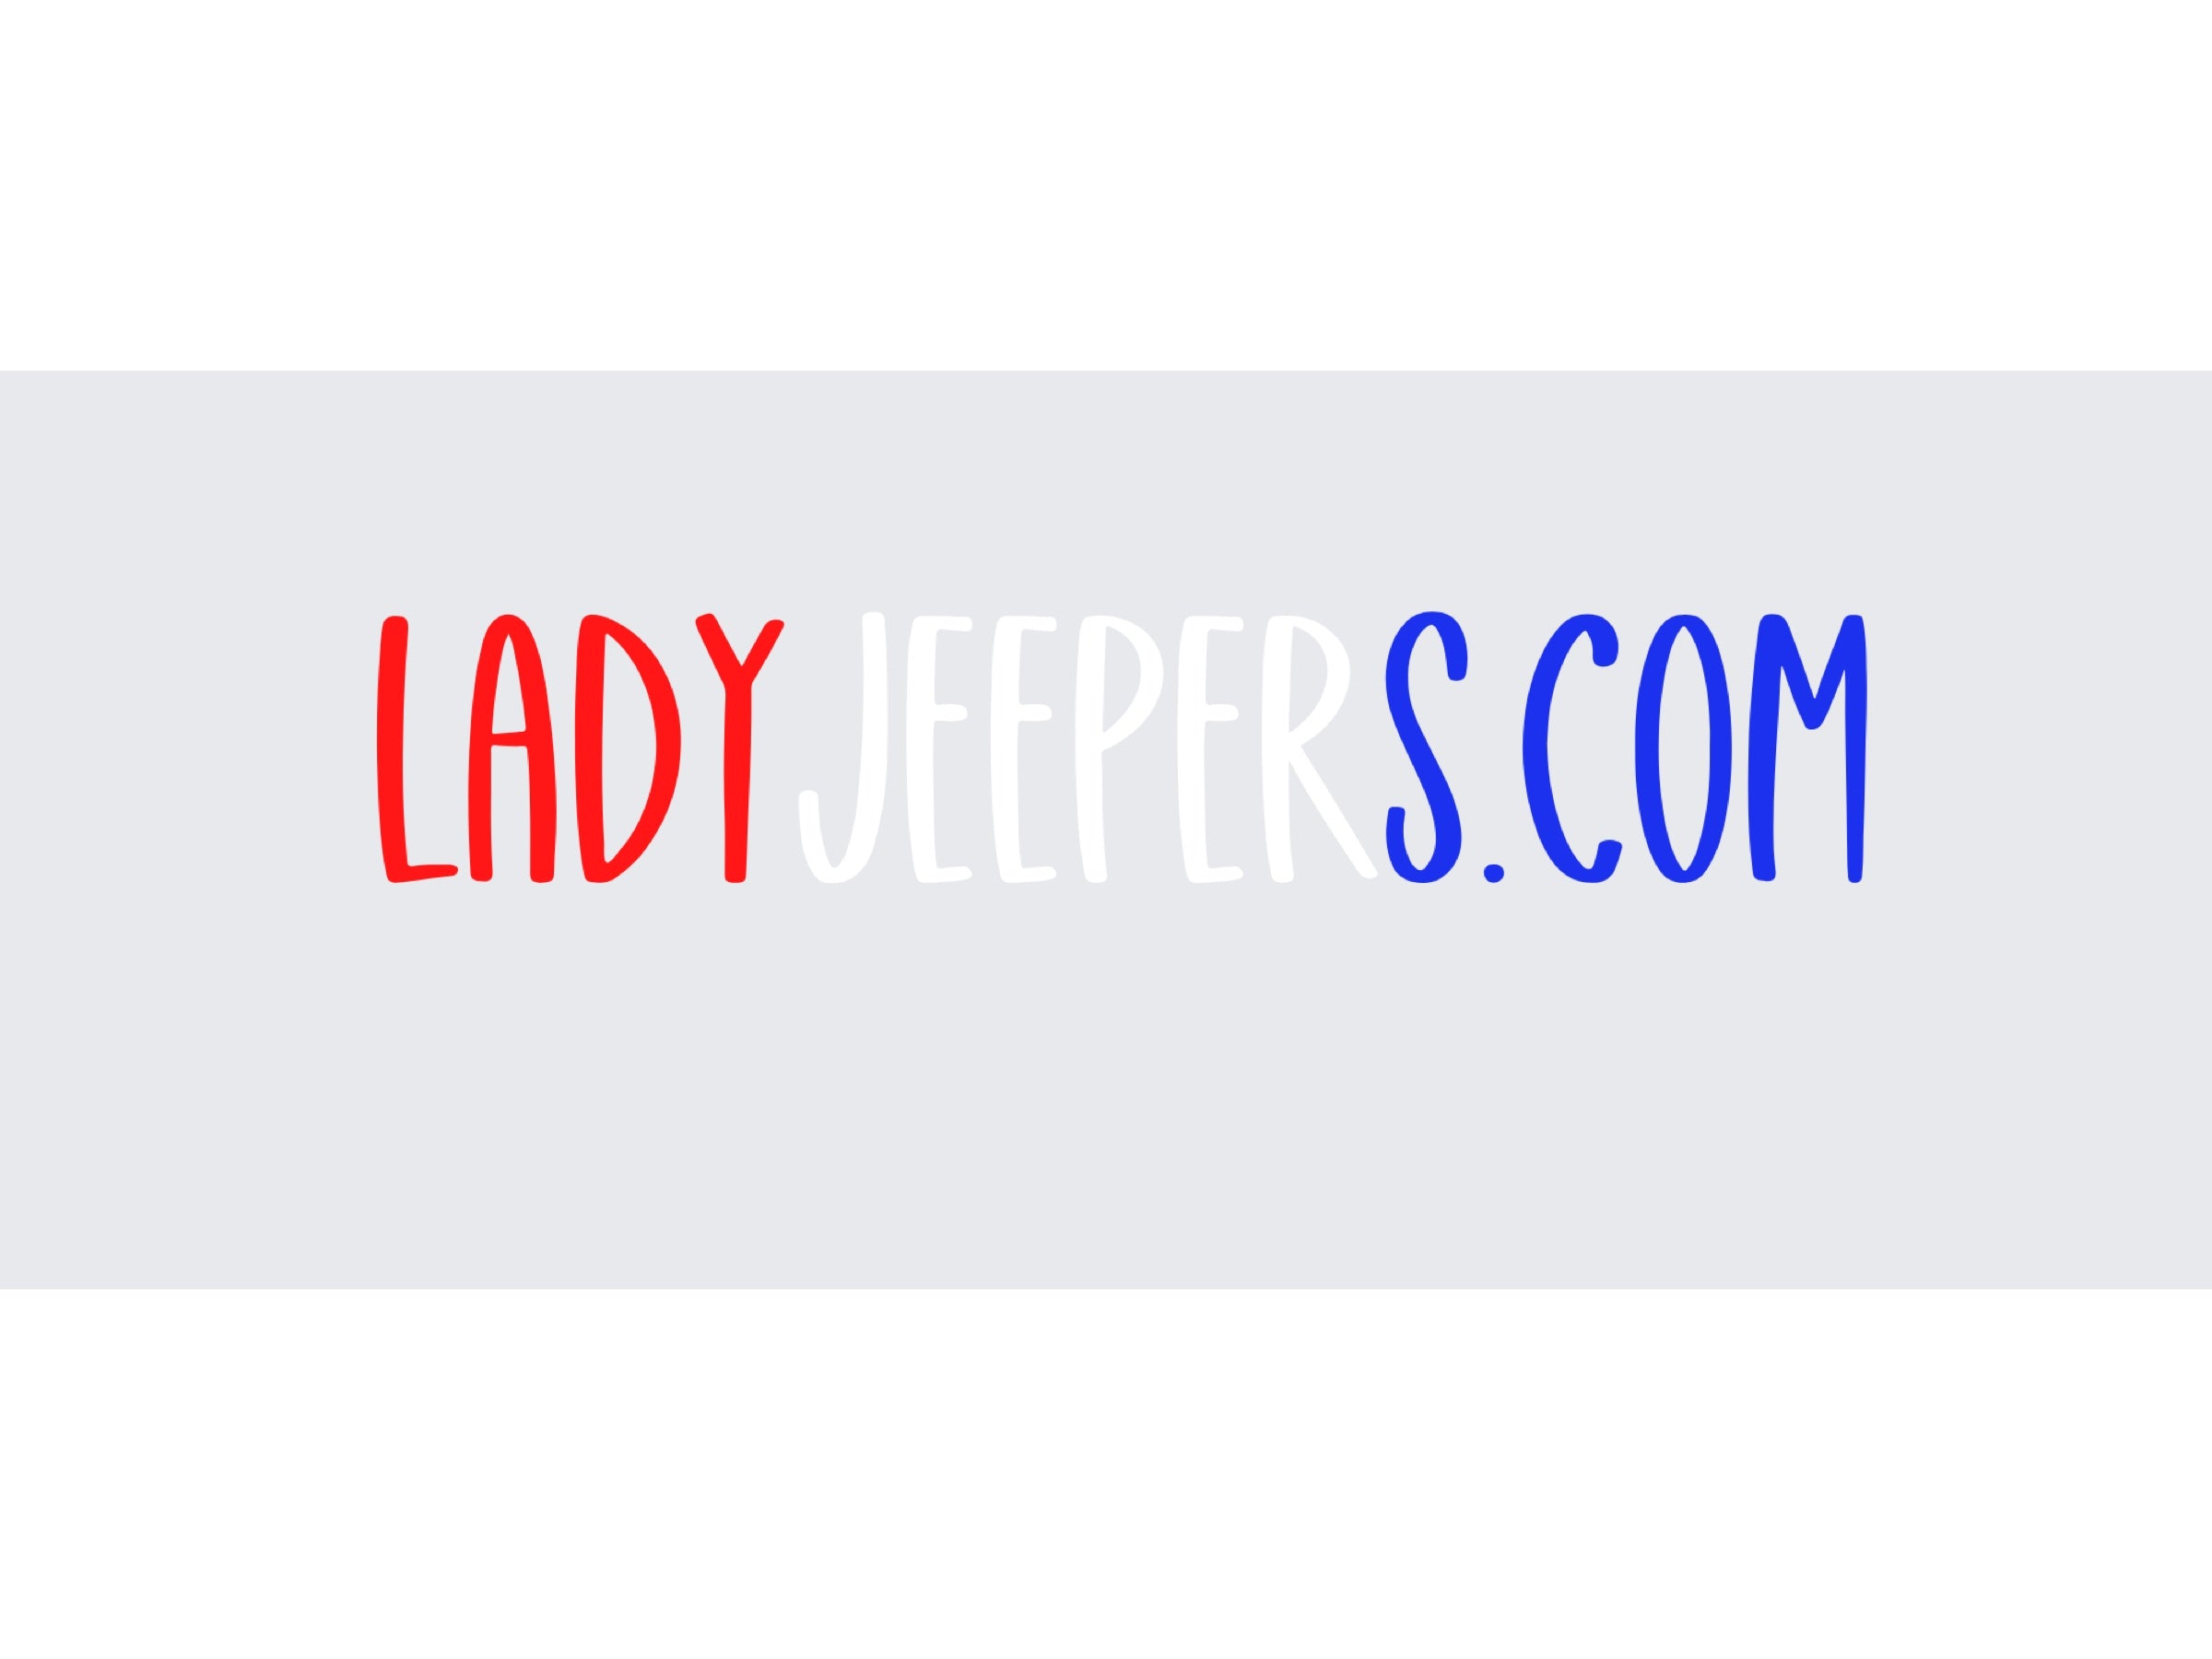 Red, white & blue long LadyJeepers.com decal!